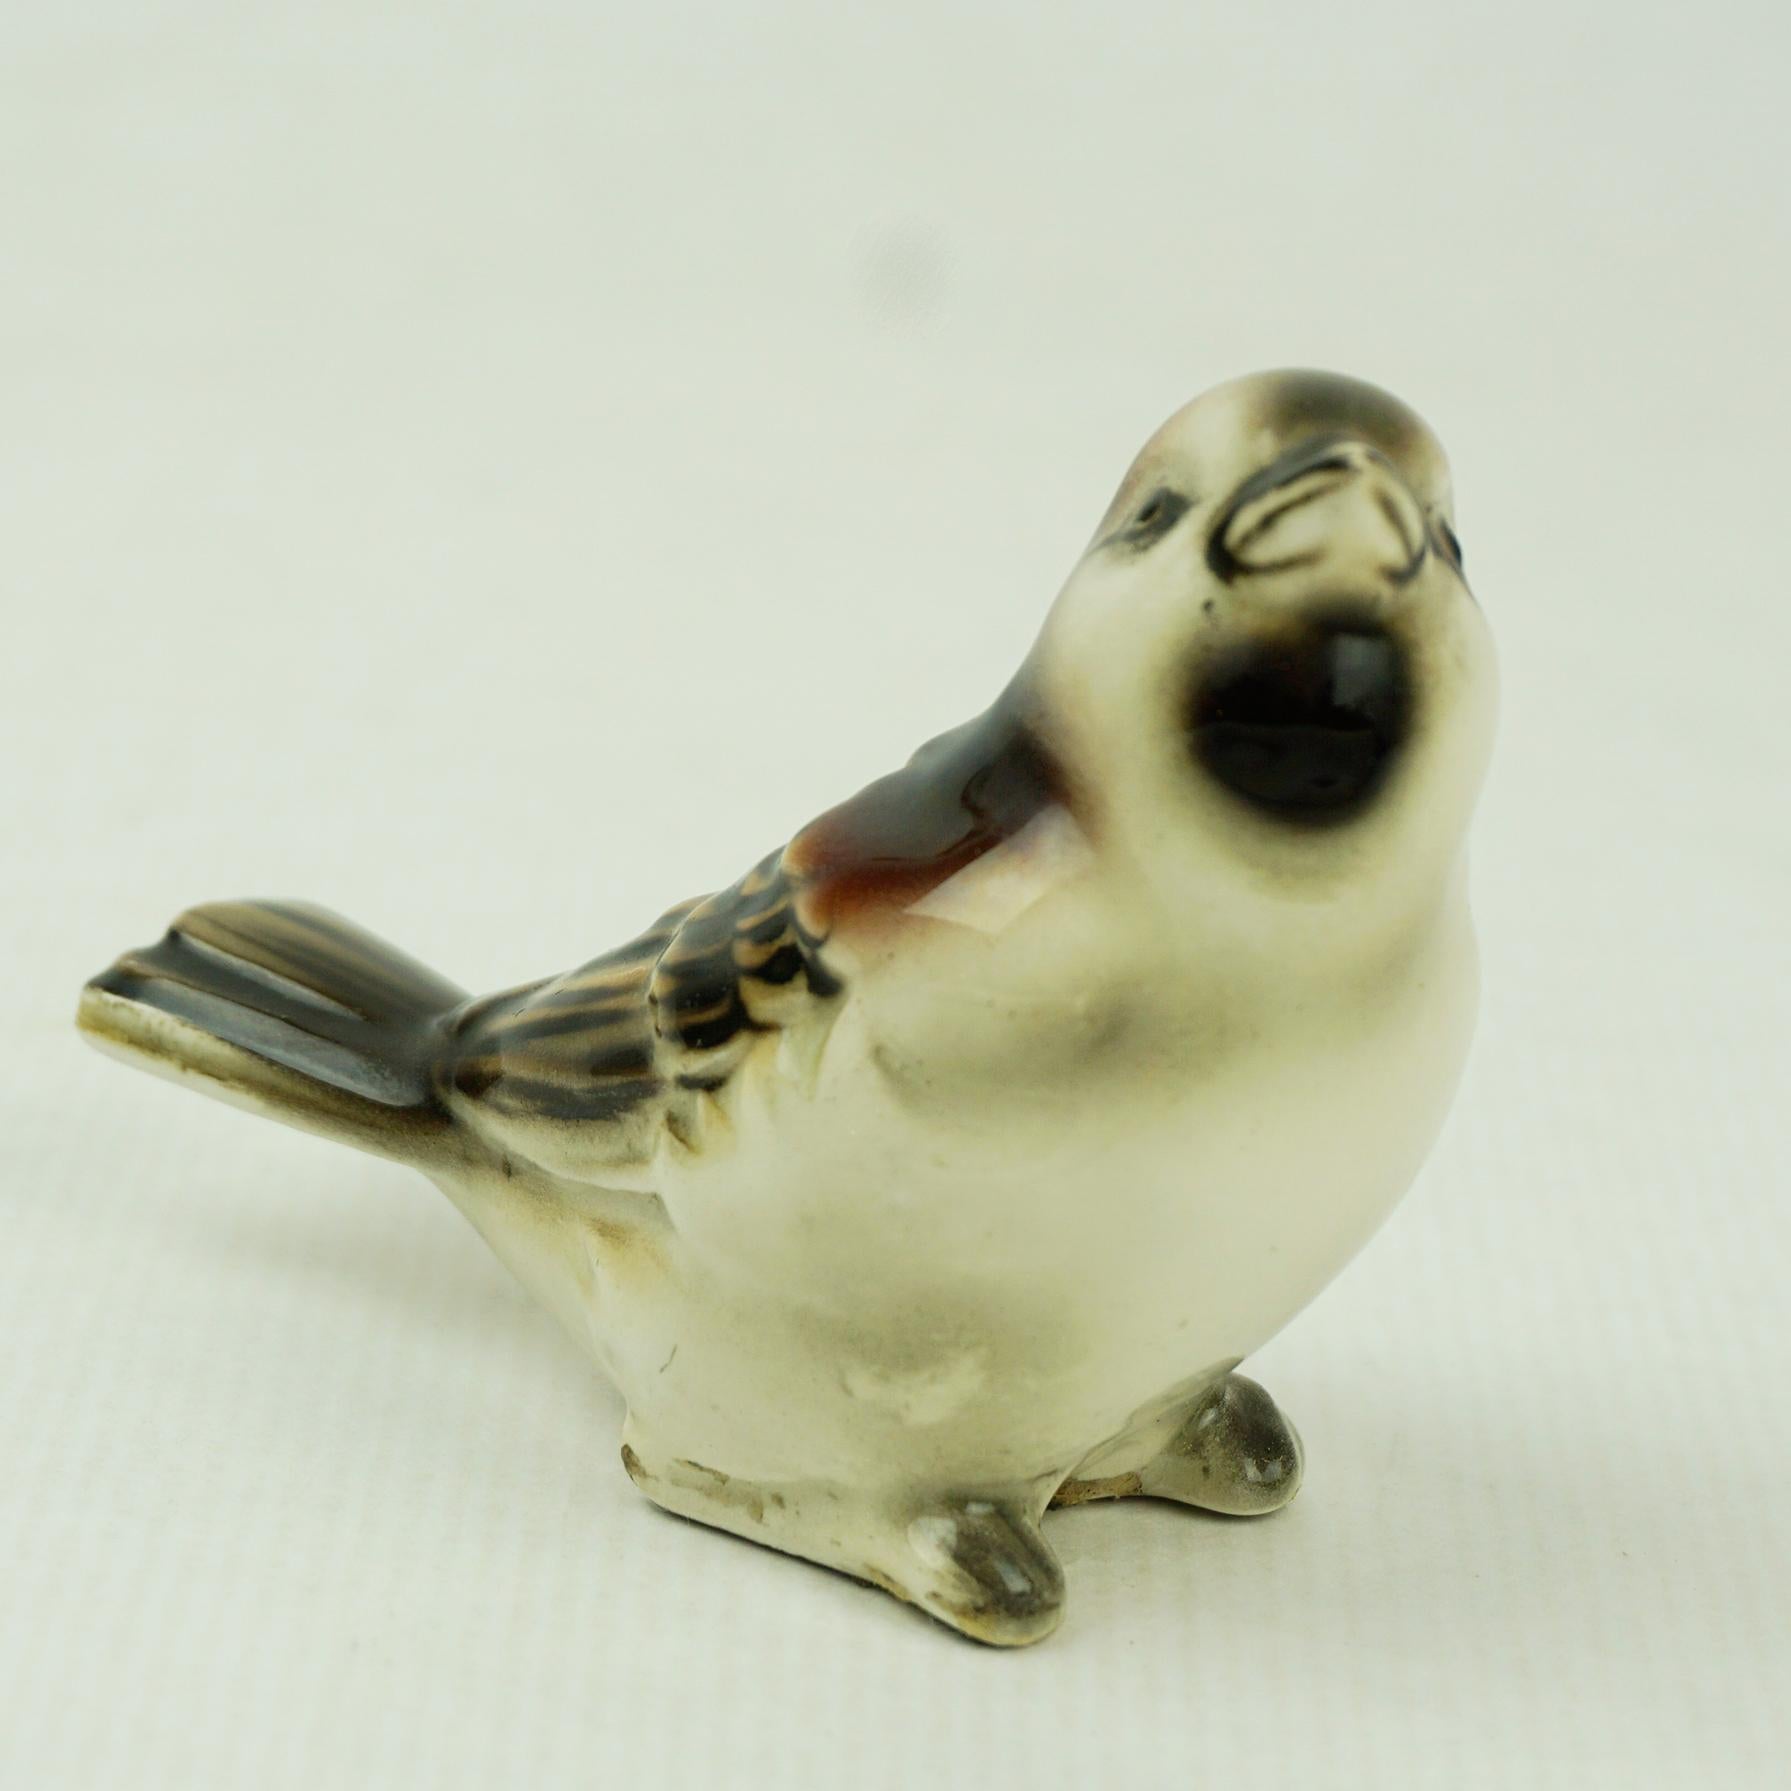 This fine rare antique piece of glazed Austrian ceramic bird was designed by Eduard Klablena. This magnificent little sparrow is expertly crafted and in excellent condition dating to roughly 1918/1919. Signed EK on the underside.
The images